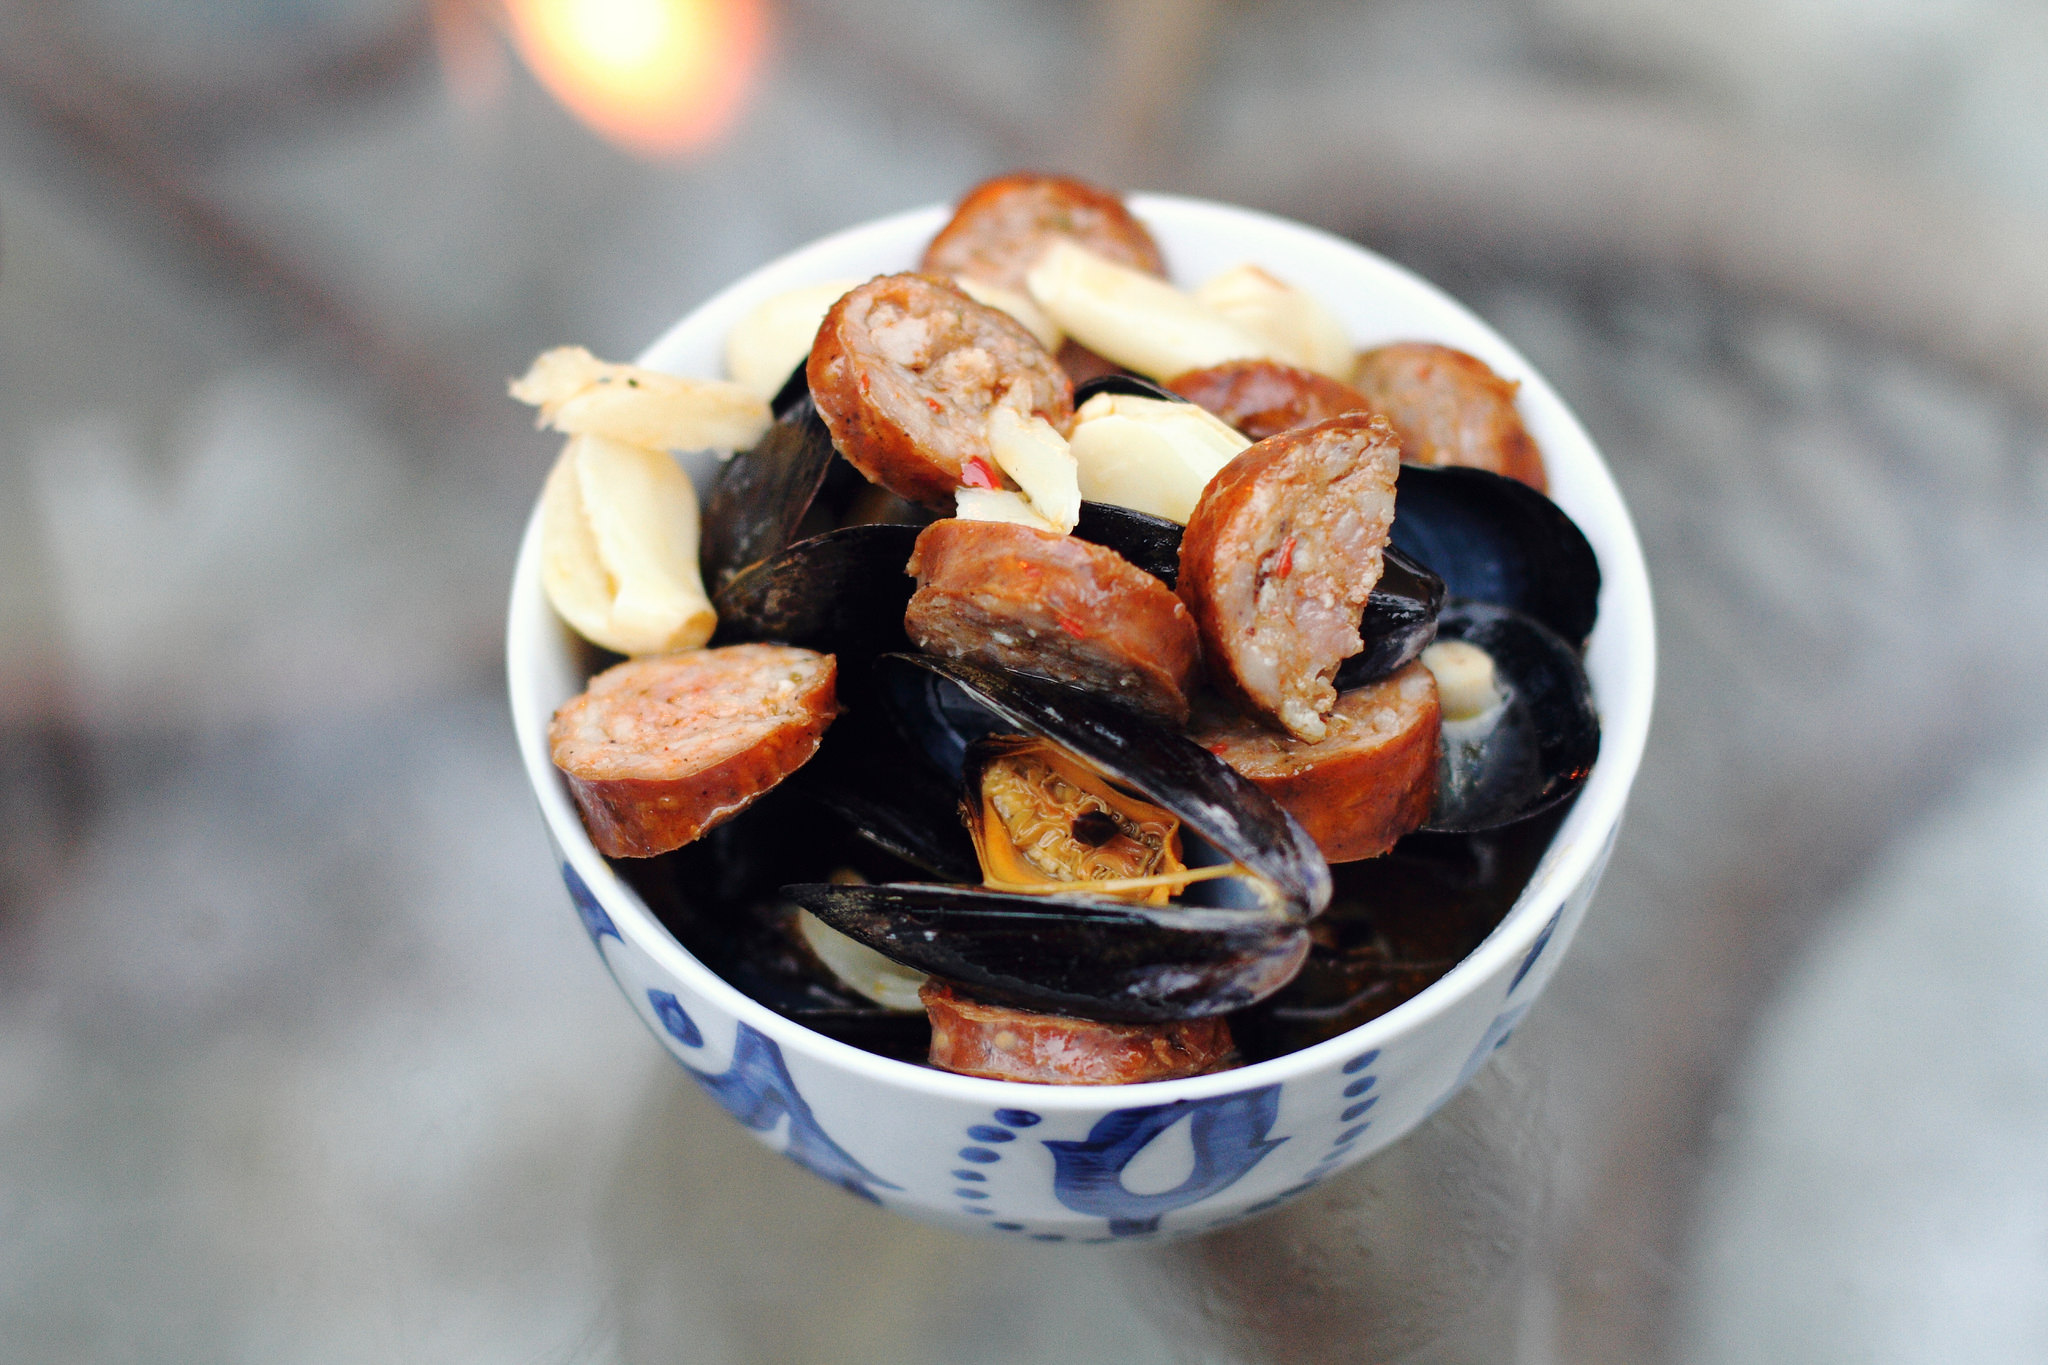  Beer and Andouille Sausage Grilled Mussels